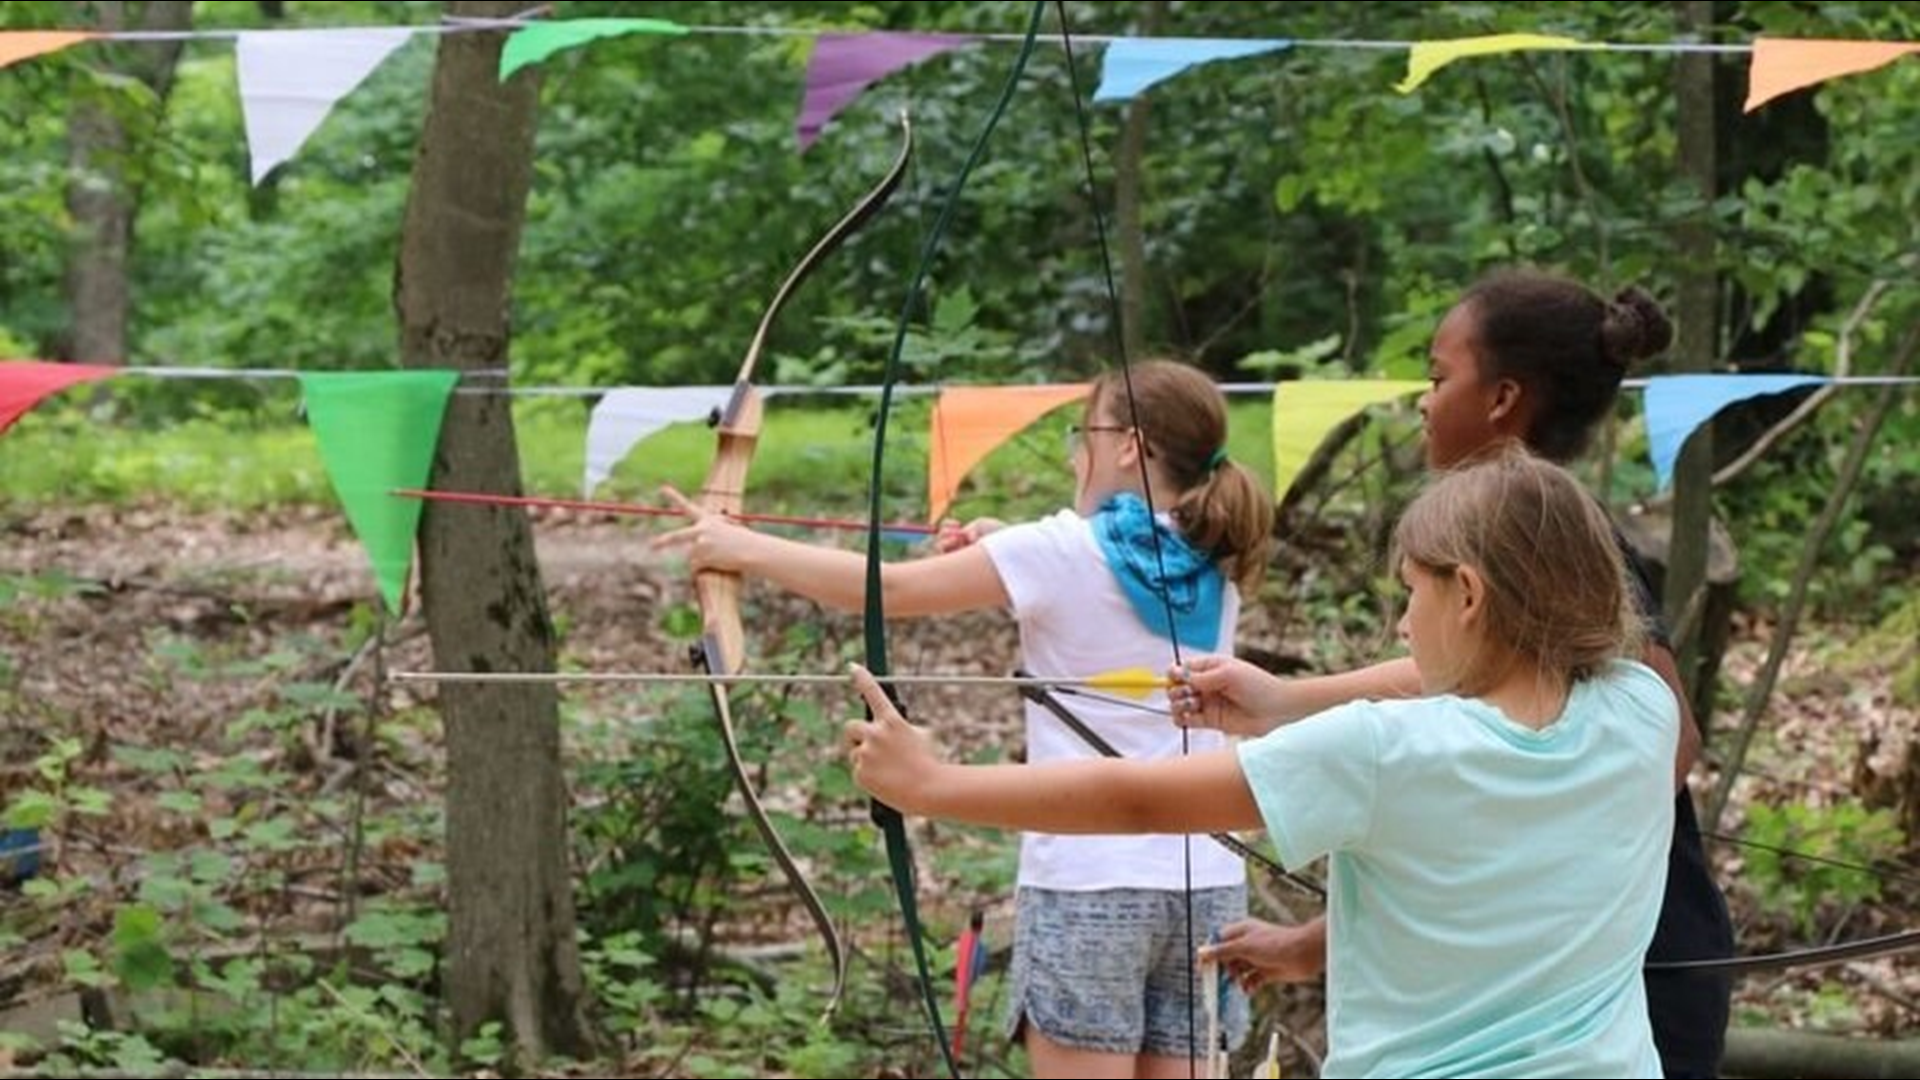 Camp Newaygo is a TrueNorth community service and has been offering residential summer camp experiences for girls since 1926